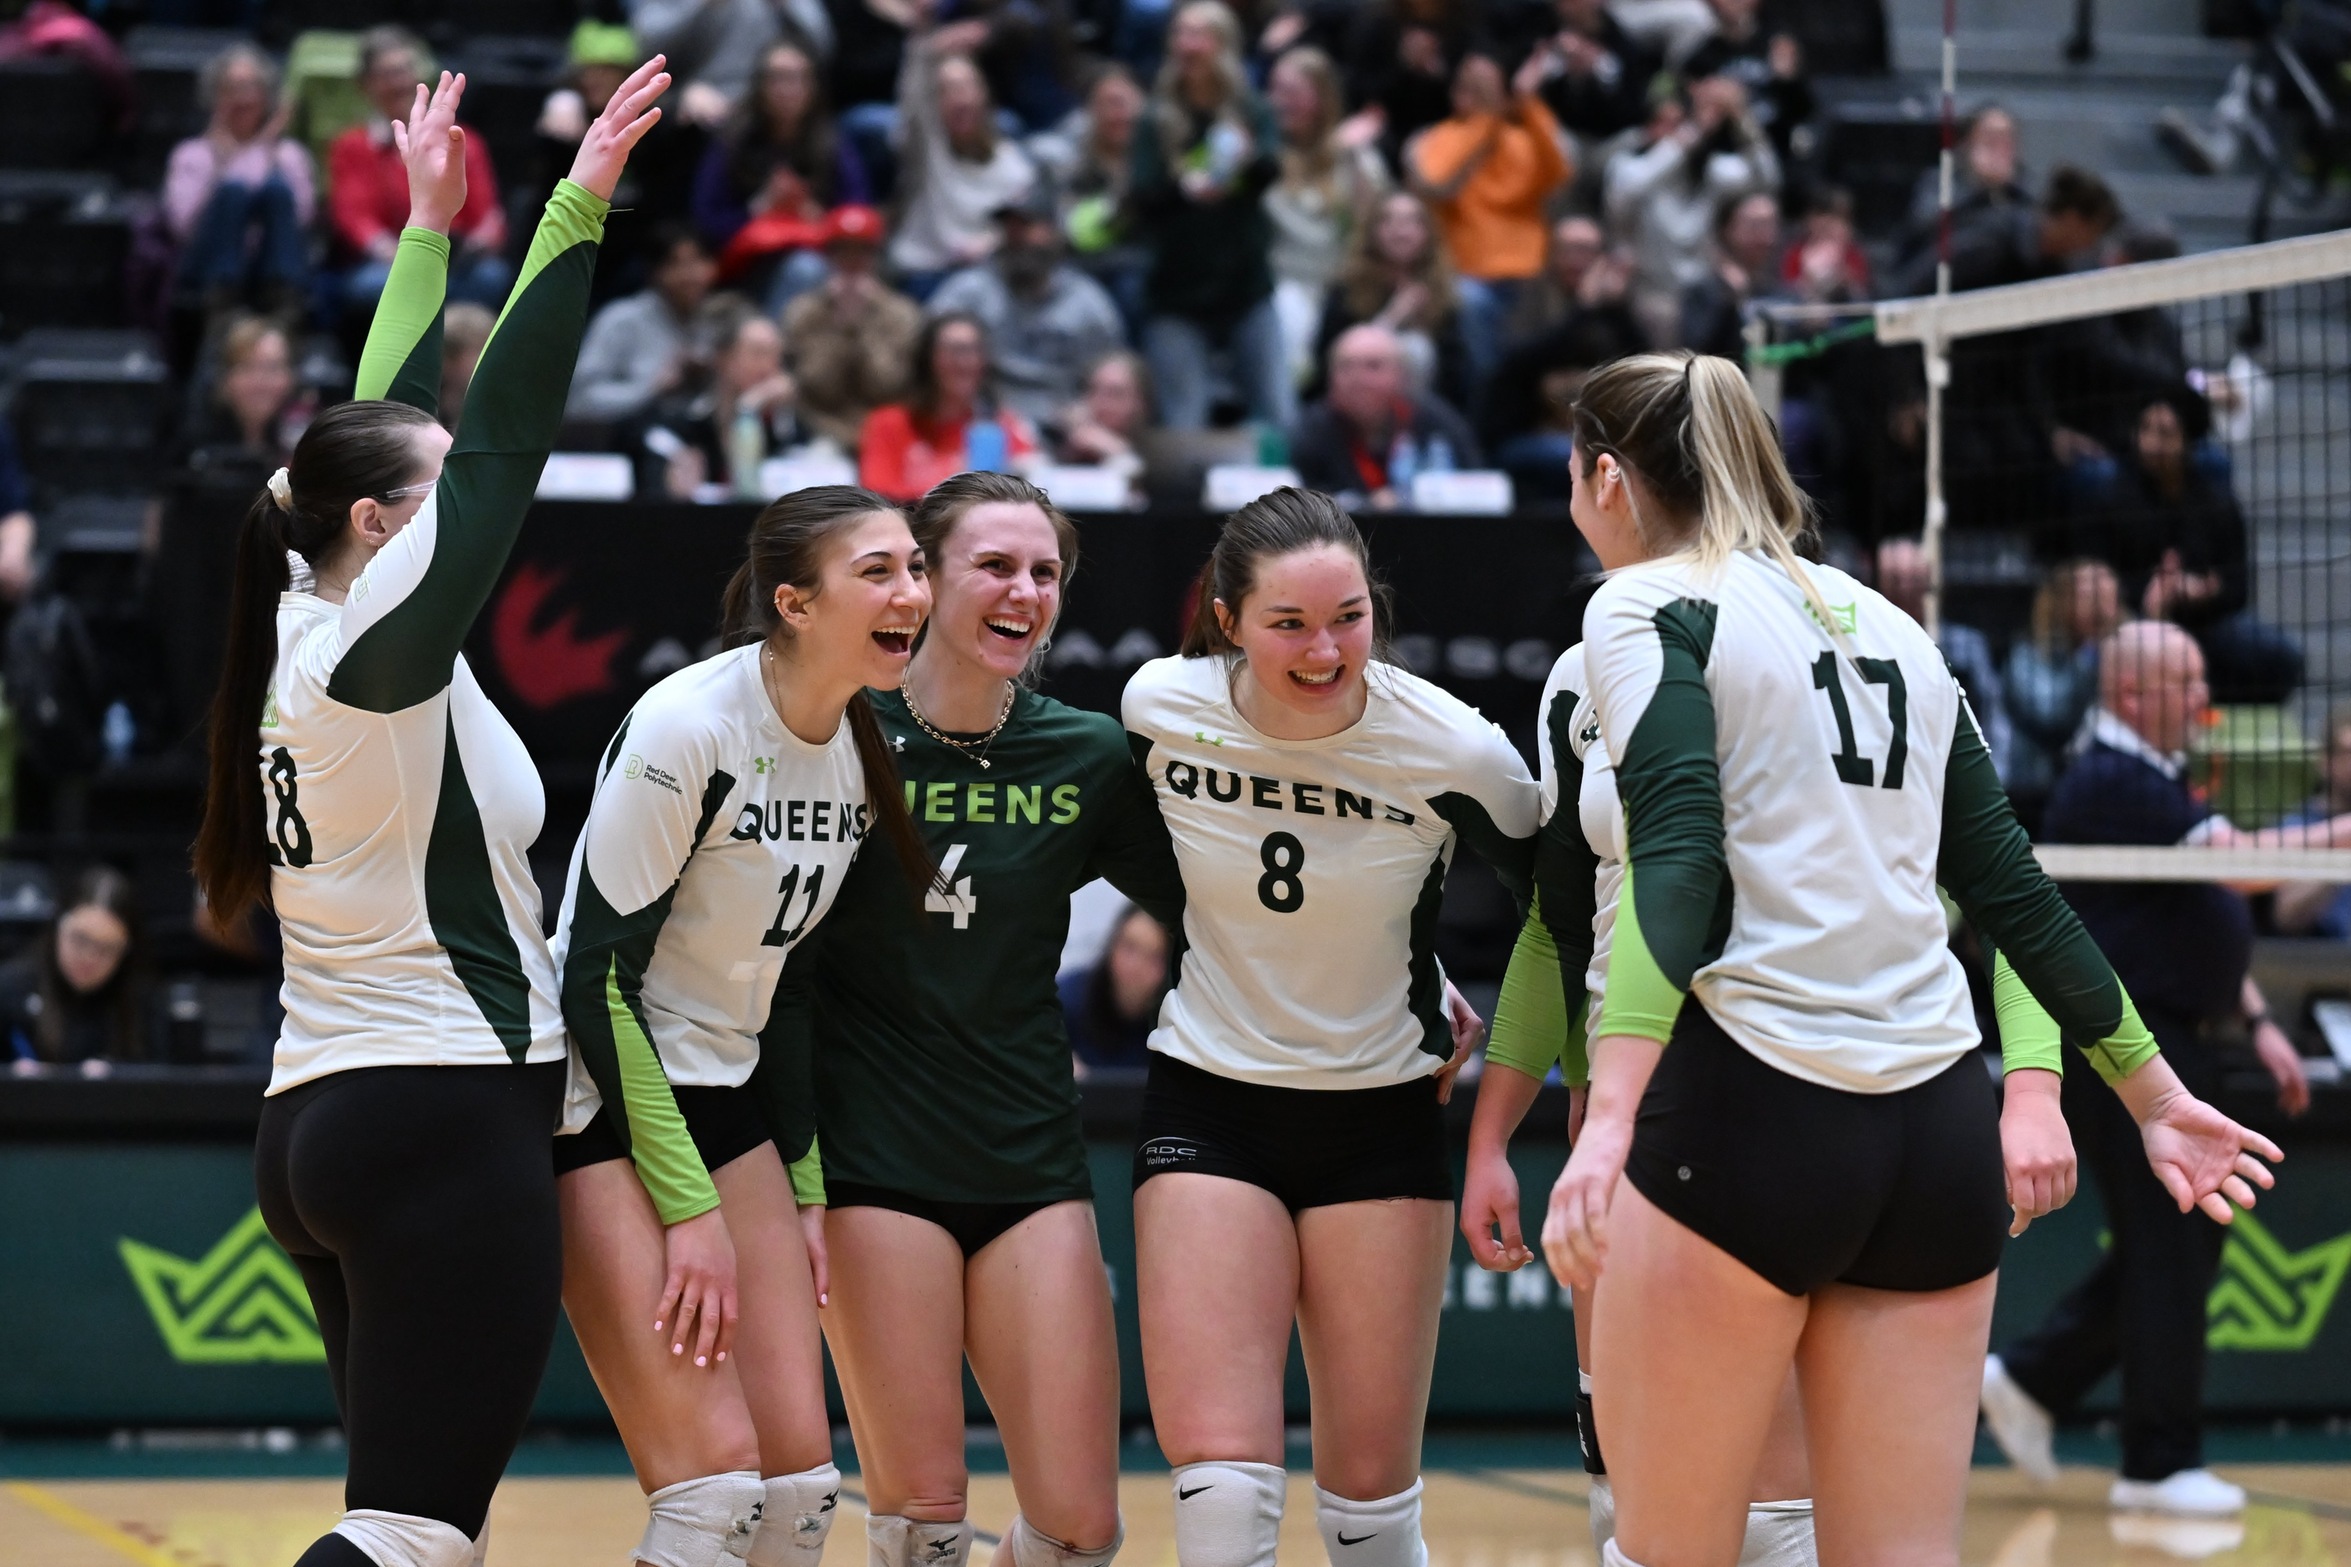 Finalists determined on day two at CCAA Women&rsquo;s Volleyball Championship